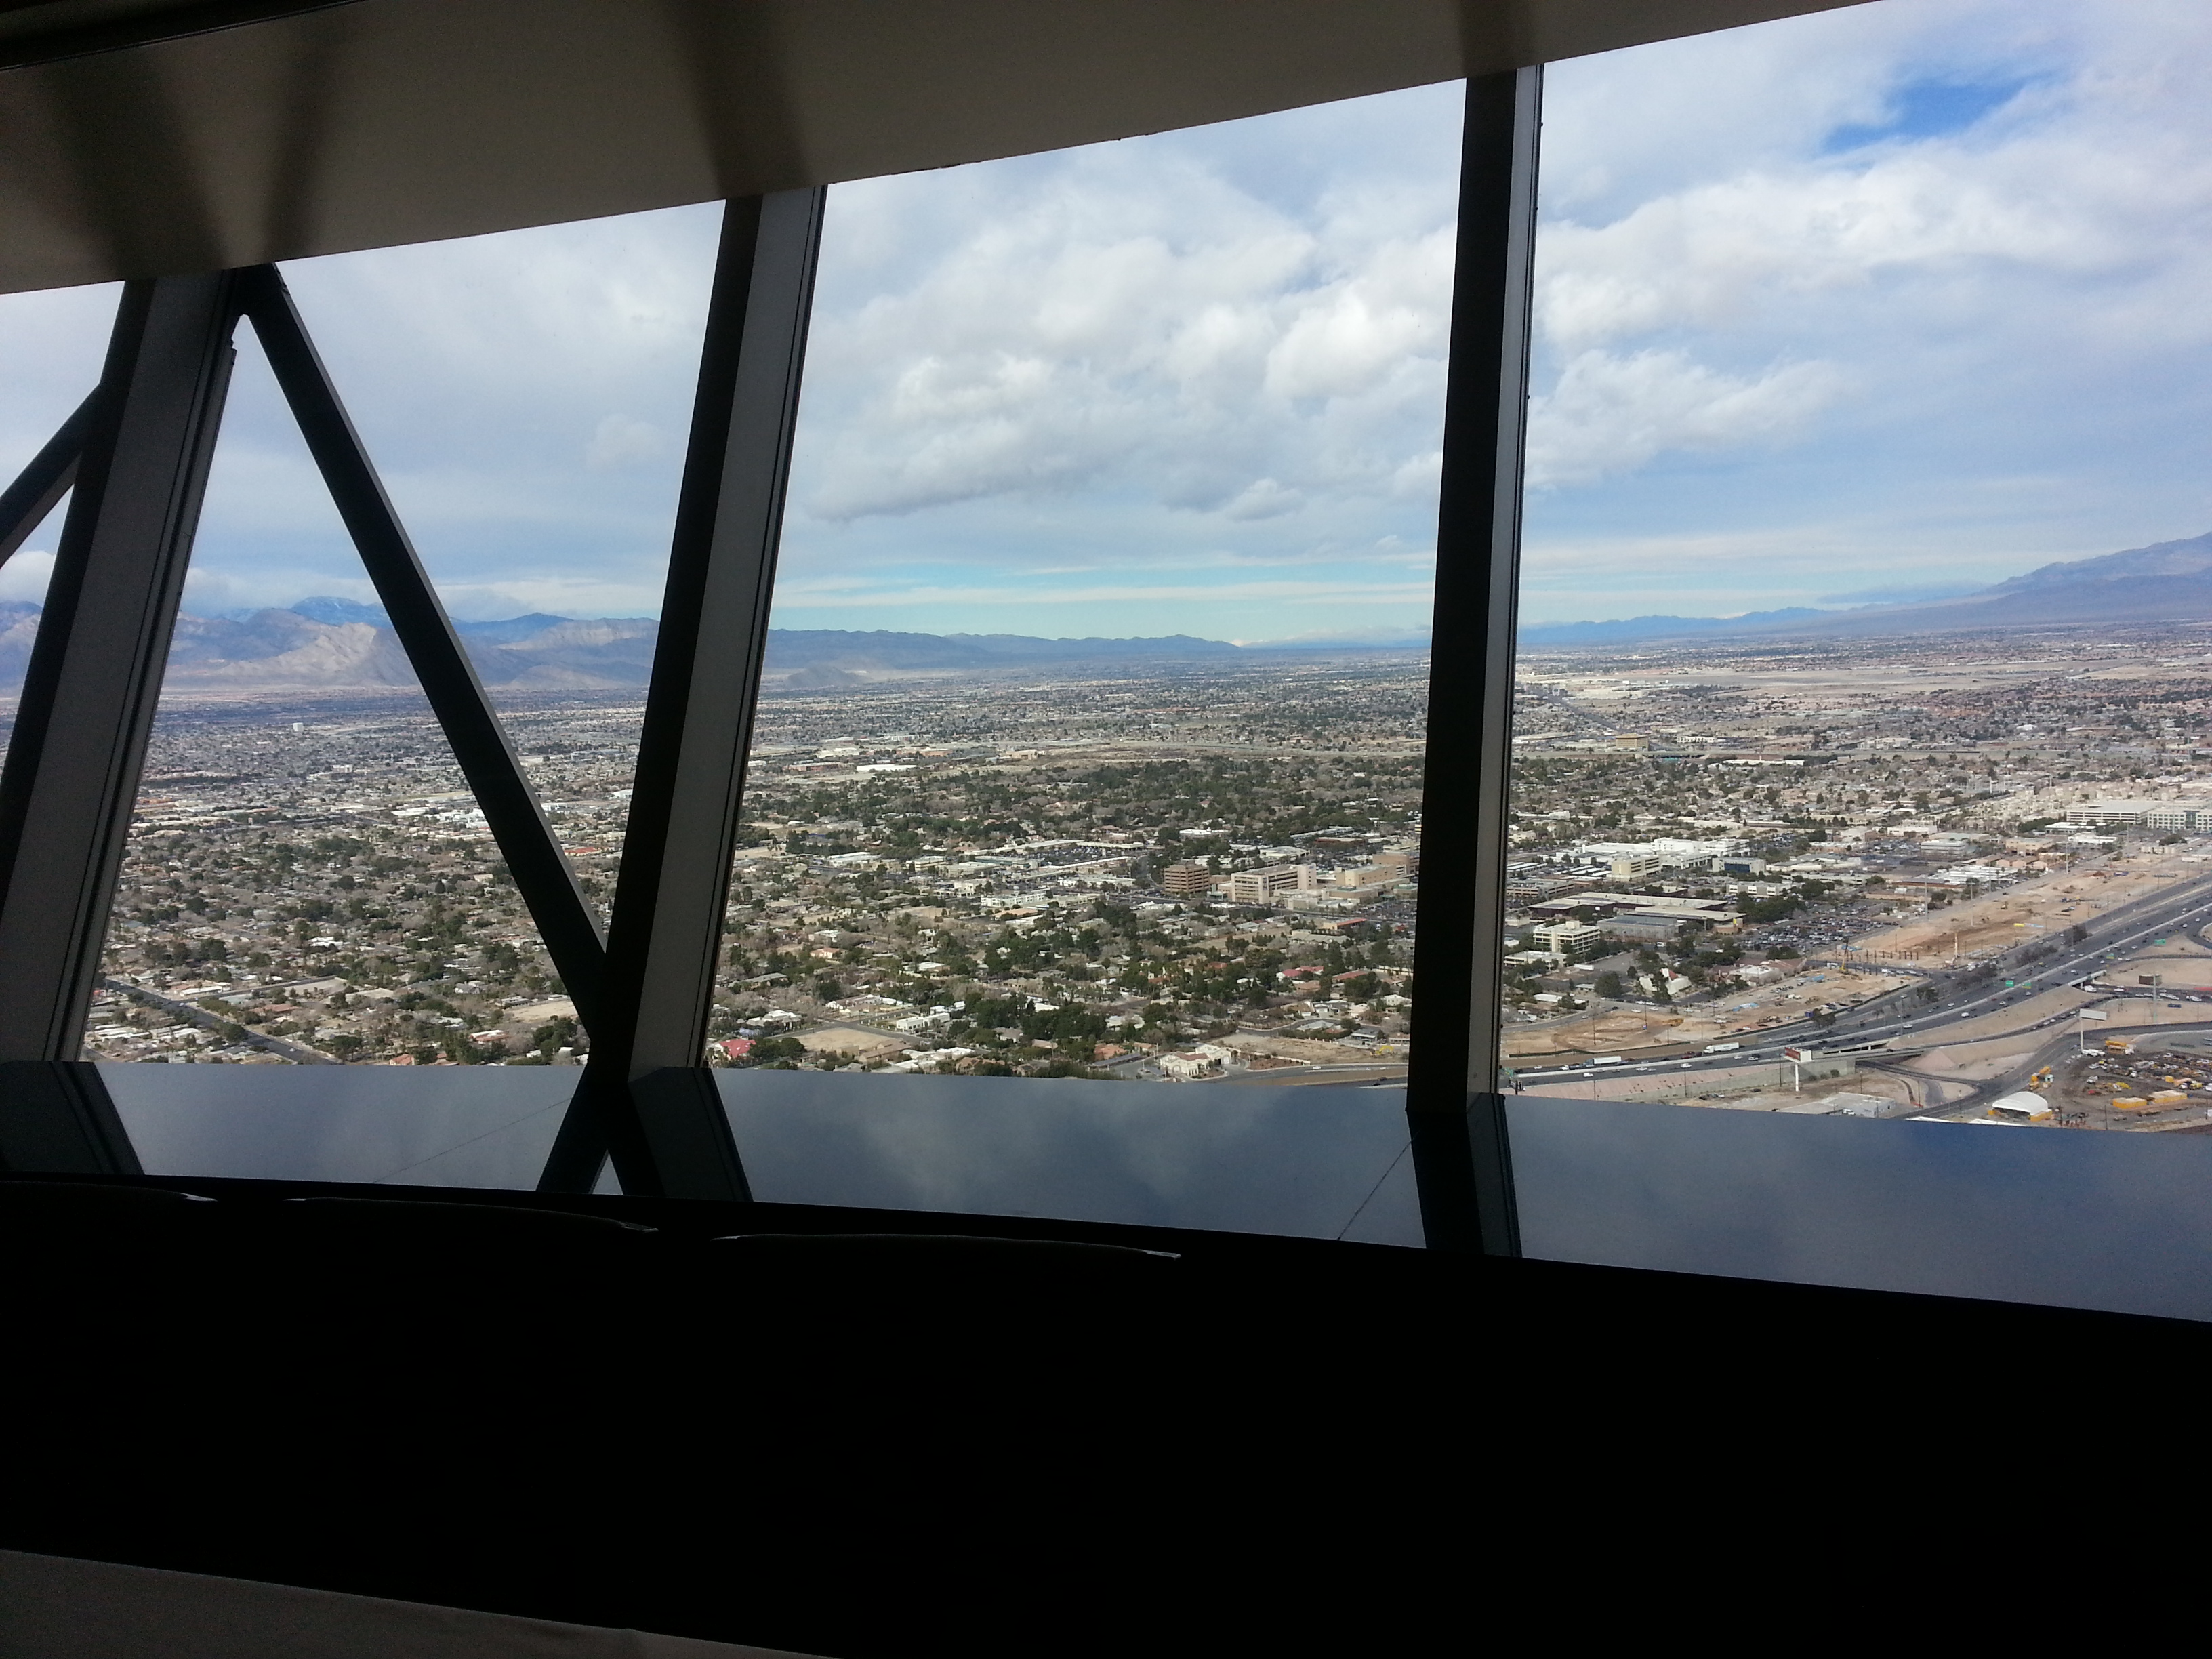 View from the Stratosphere's Majestic room where the presentations were made